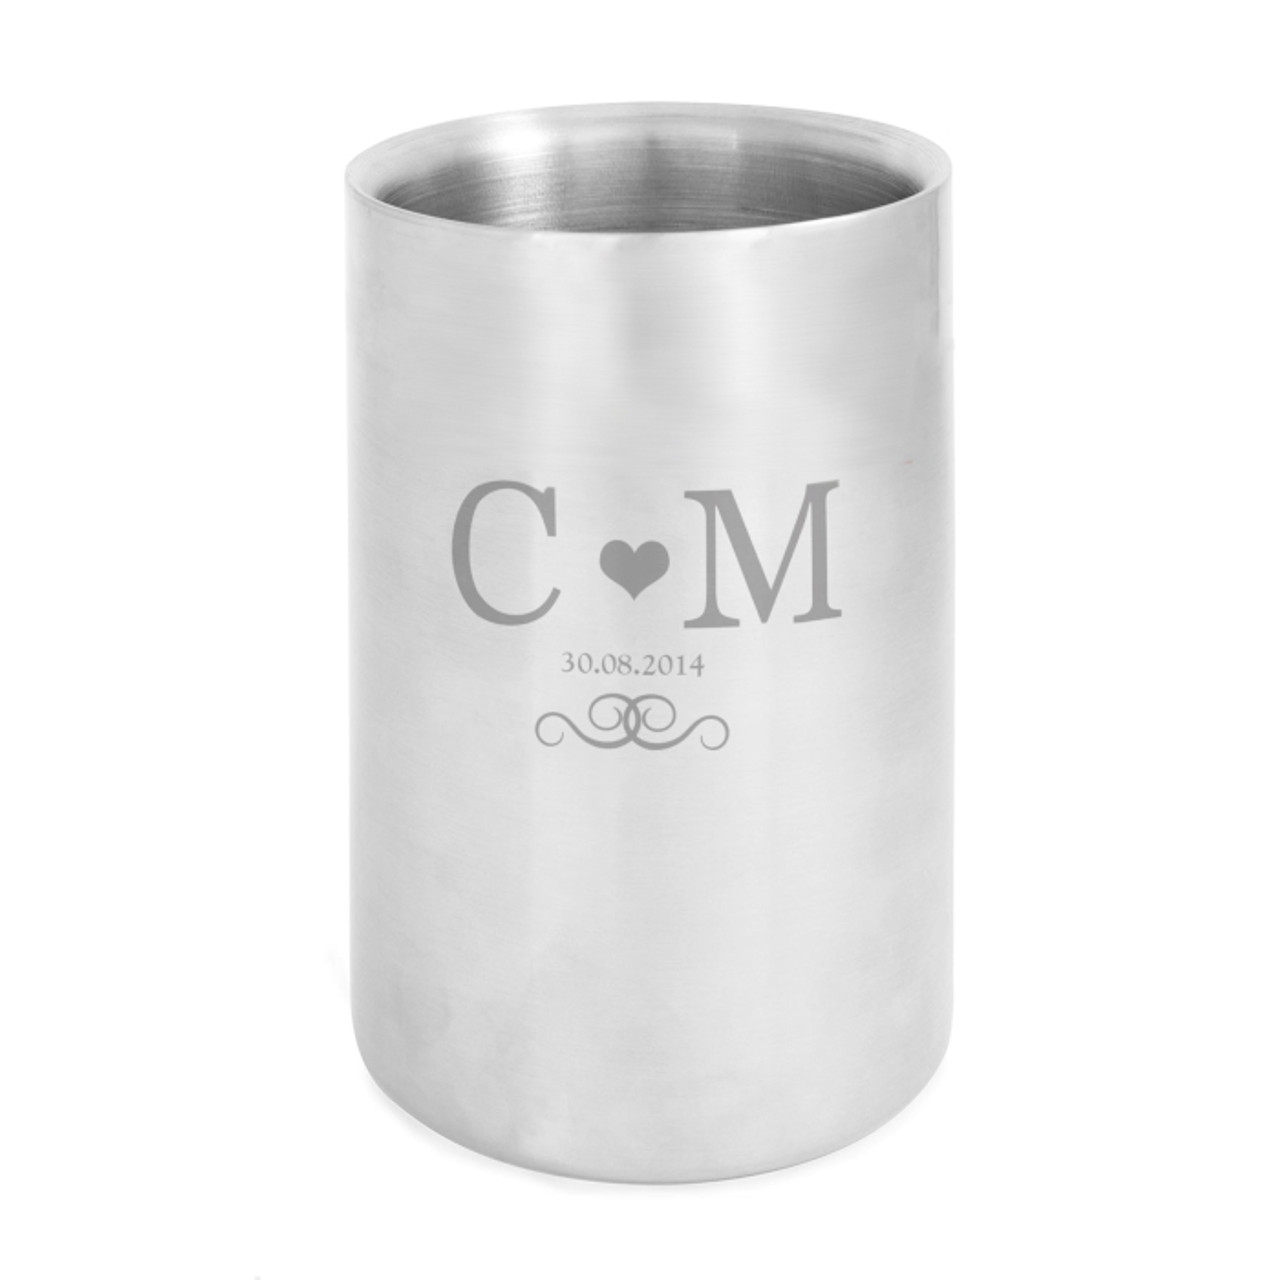 https://cdn11.bigcommerce.com/s-eu4cbuv/images/stencil/1280x1280/products/384/996/stainless-steel-wine-cooler-with-initials__48646.1650548221.jpg?c=2